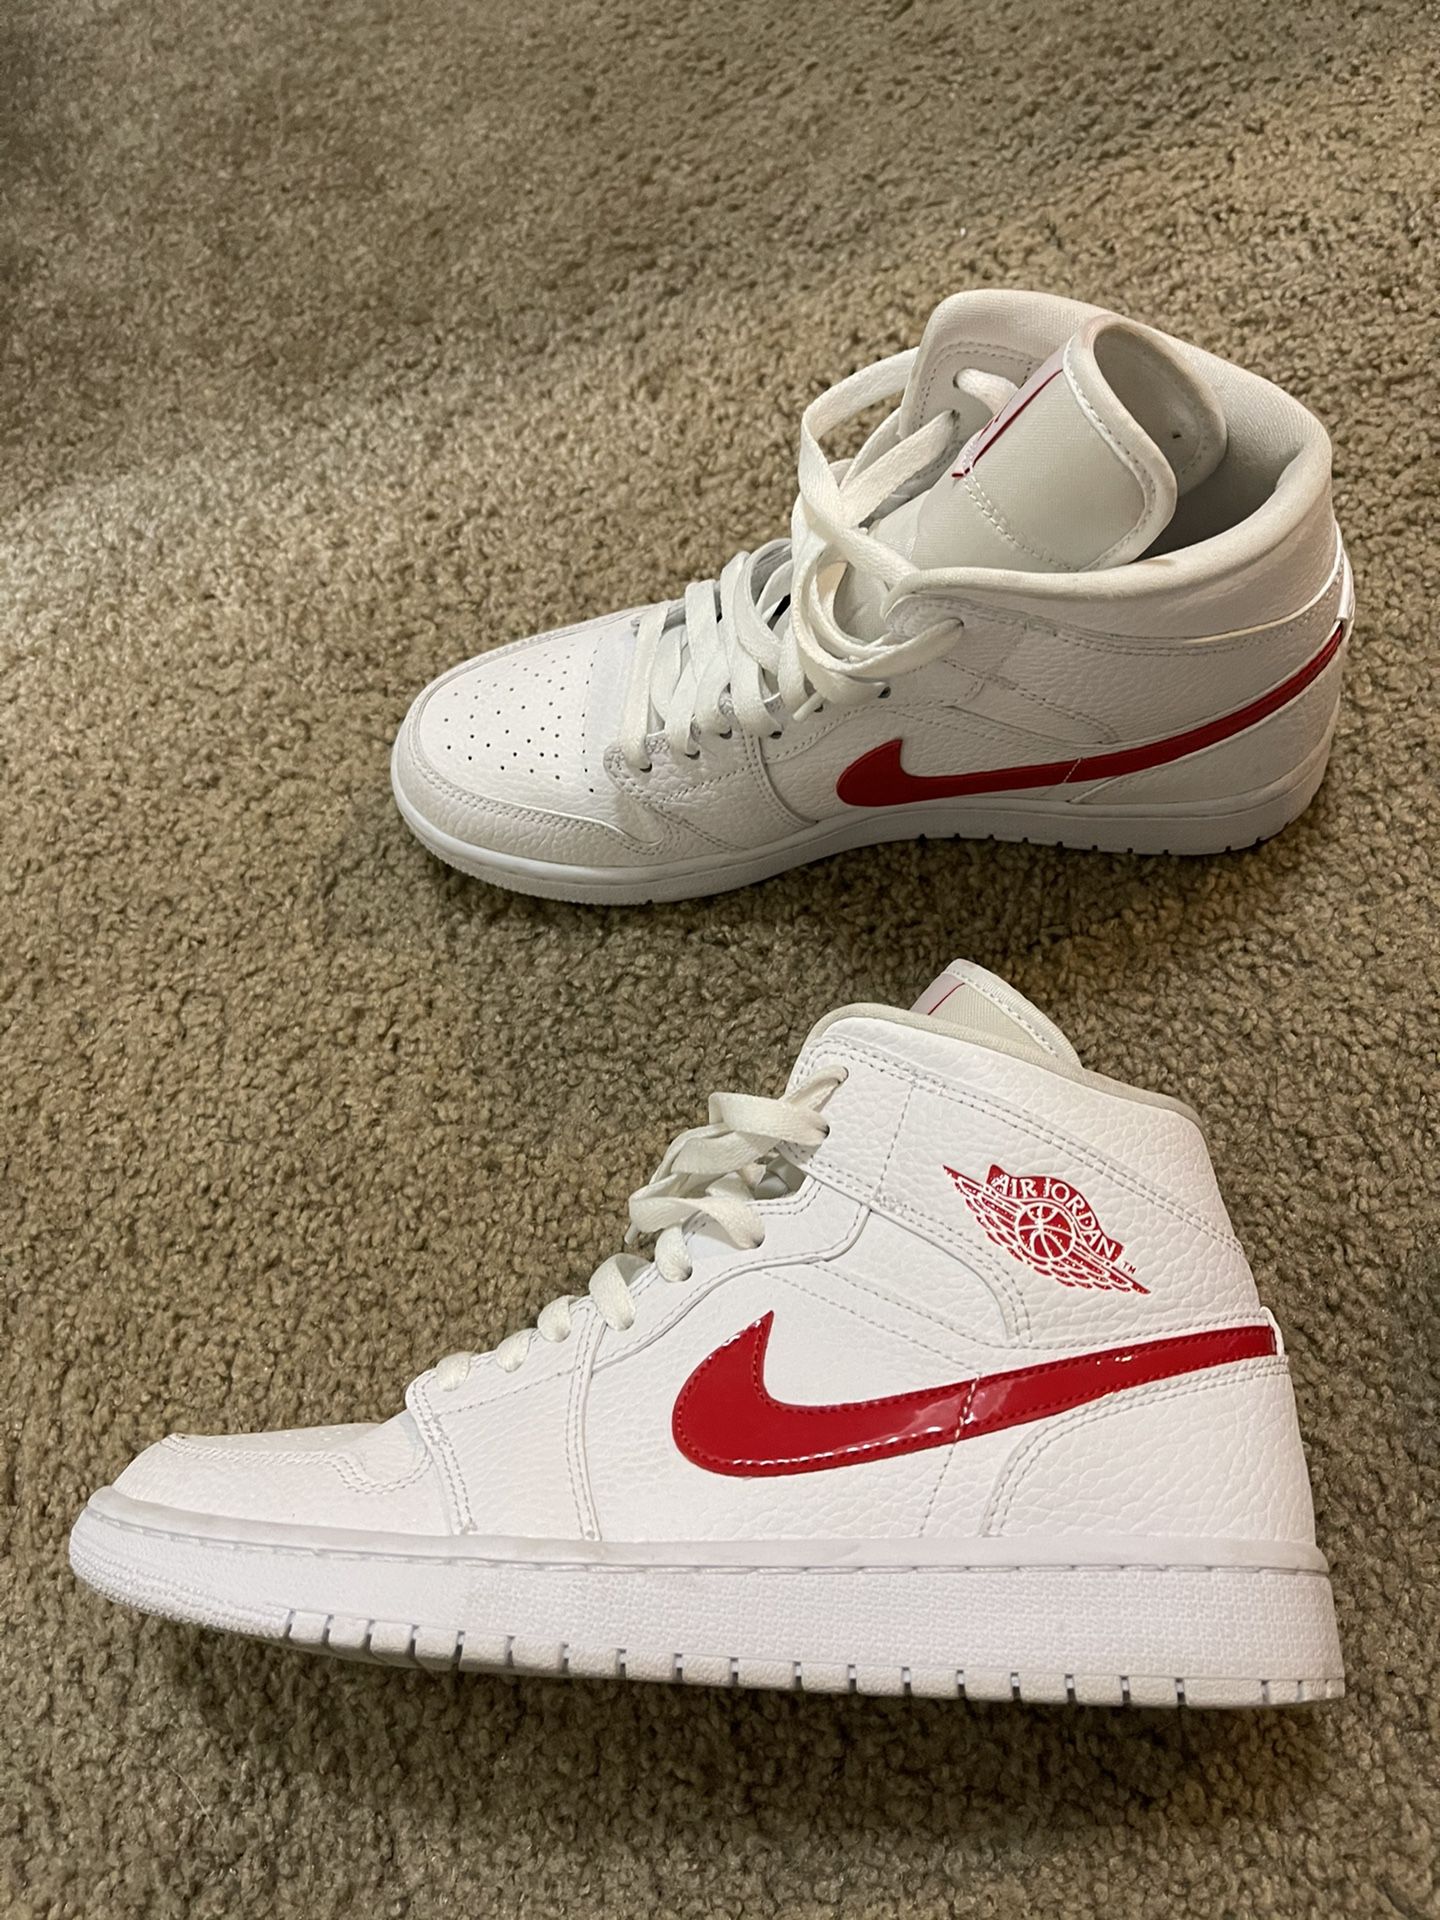 red university 1s womens size 10